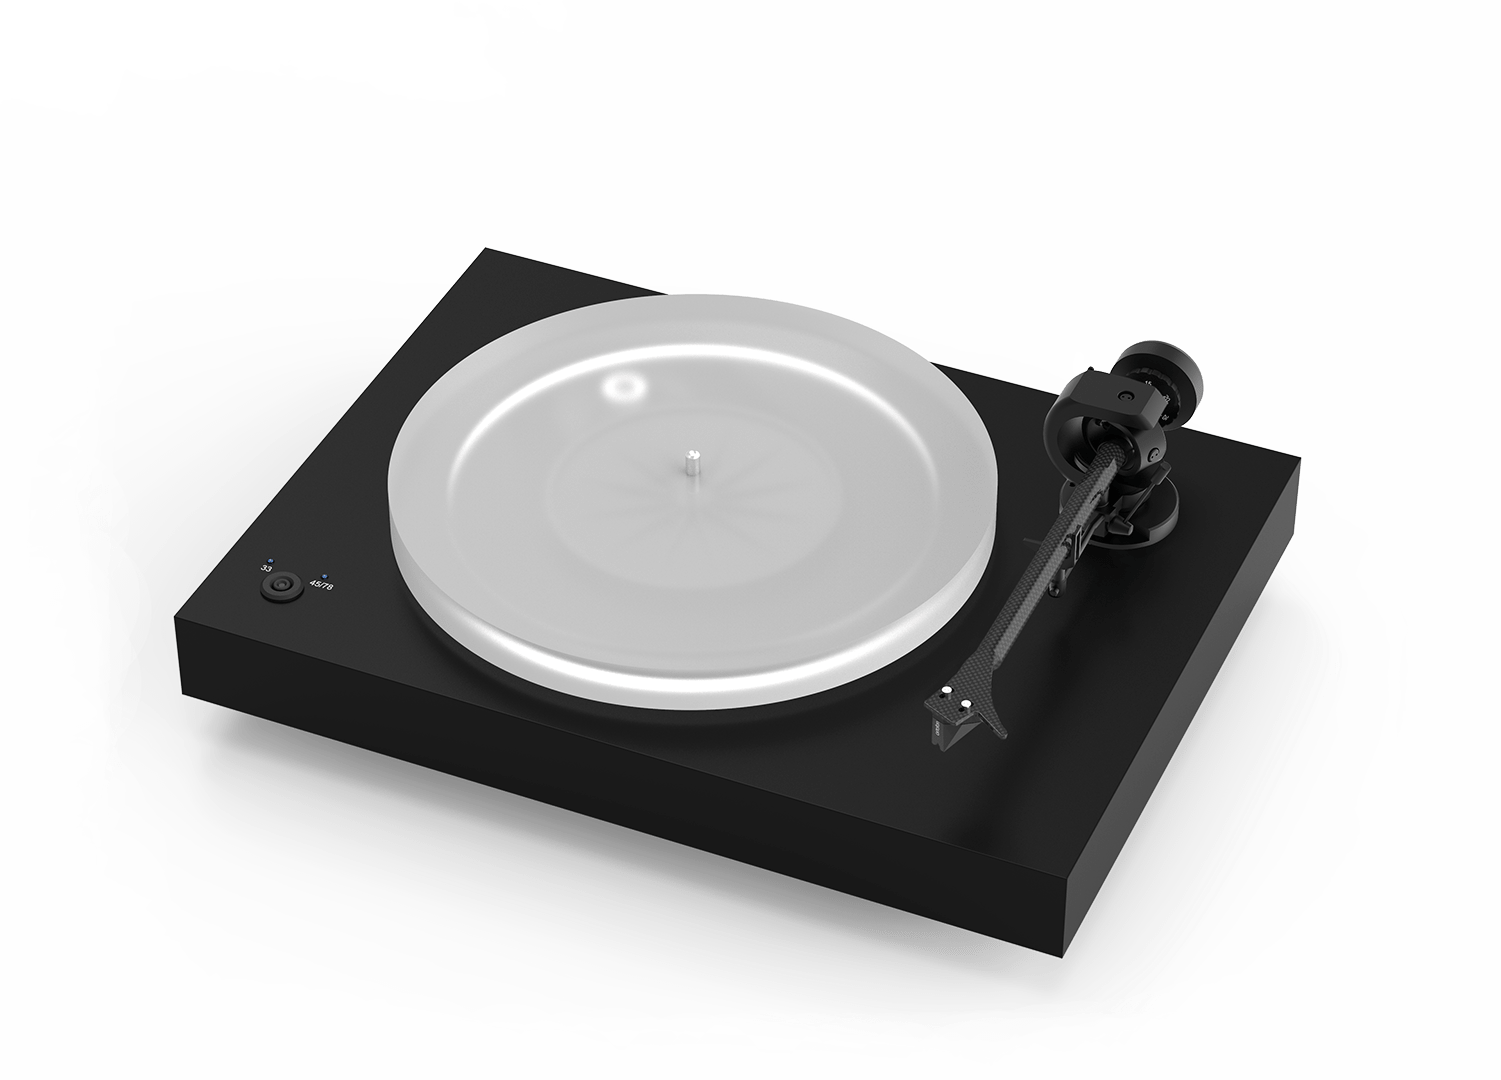 Pro-Ject X2 Turntable